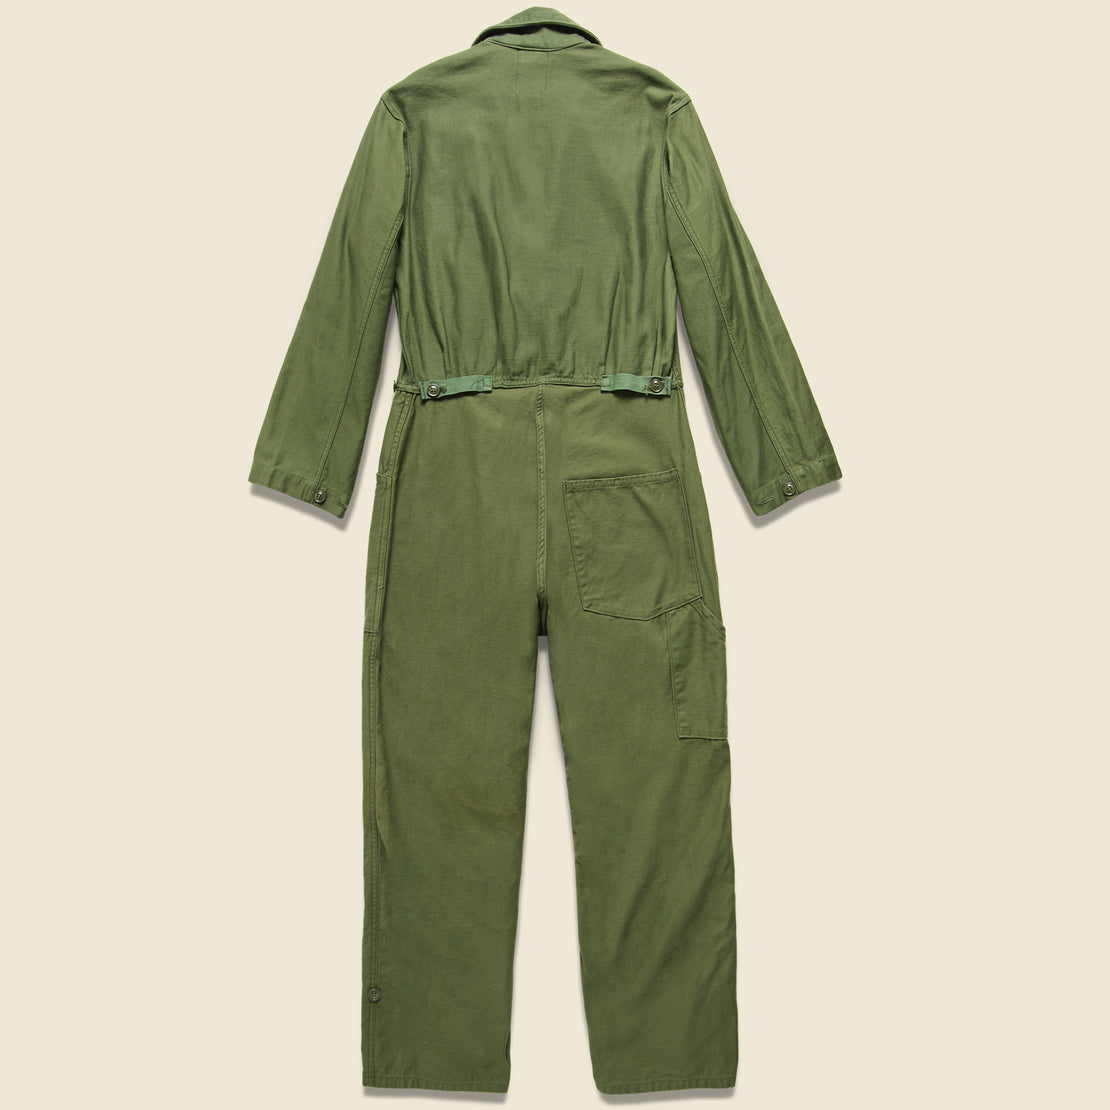 Floral Flourish Military Jumpsuit - Army Green - Fort Lonesome - STAG Provisions - W - One & Done - Apparel